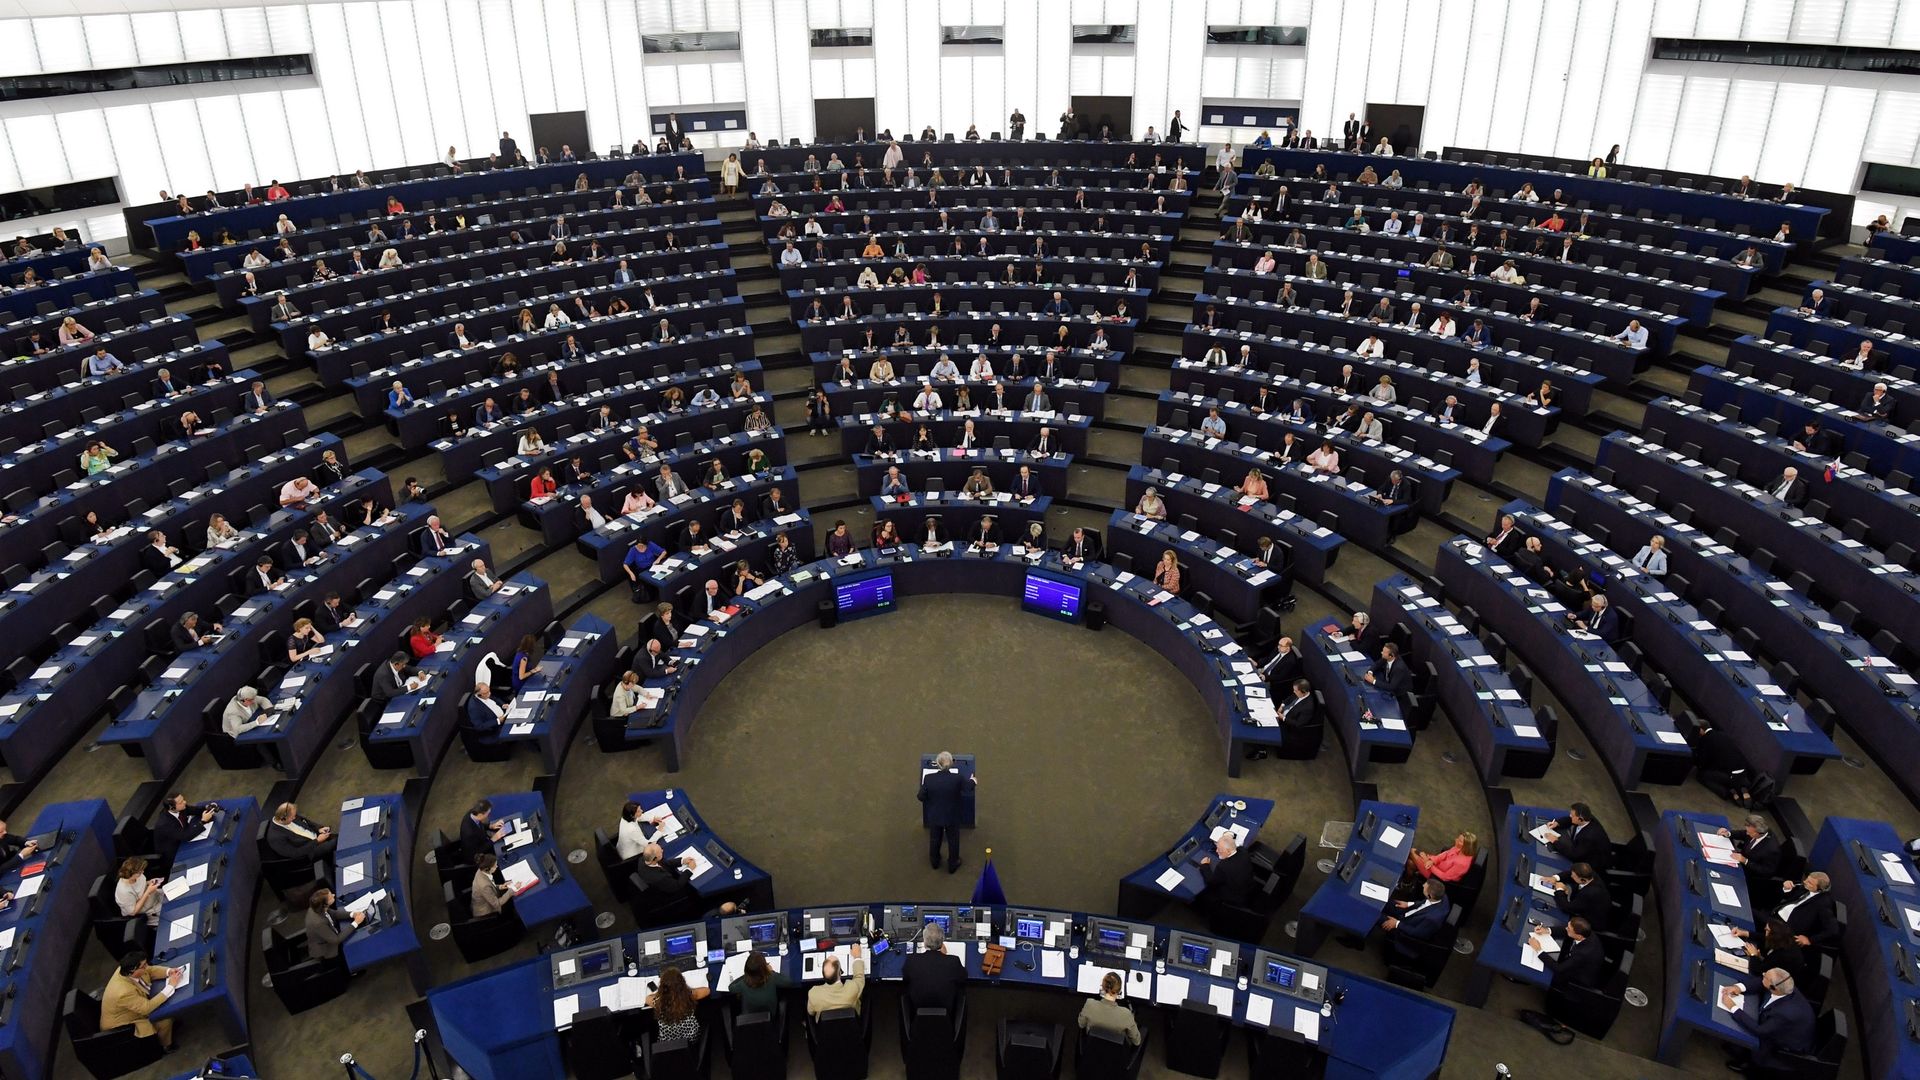 Rows of seats arranged in a circle at the European Parliament